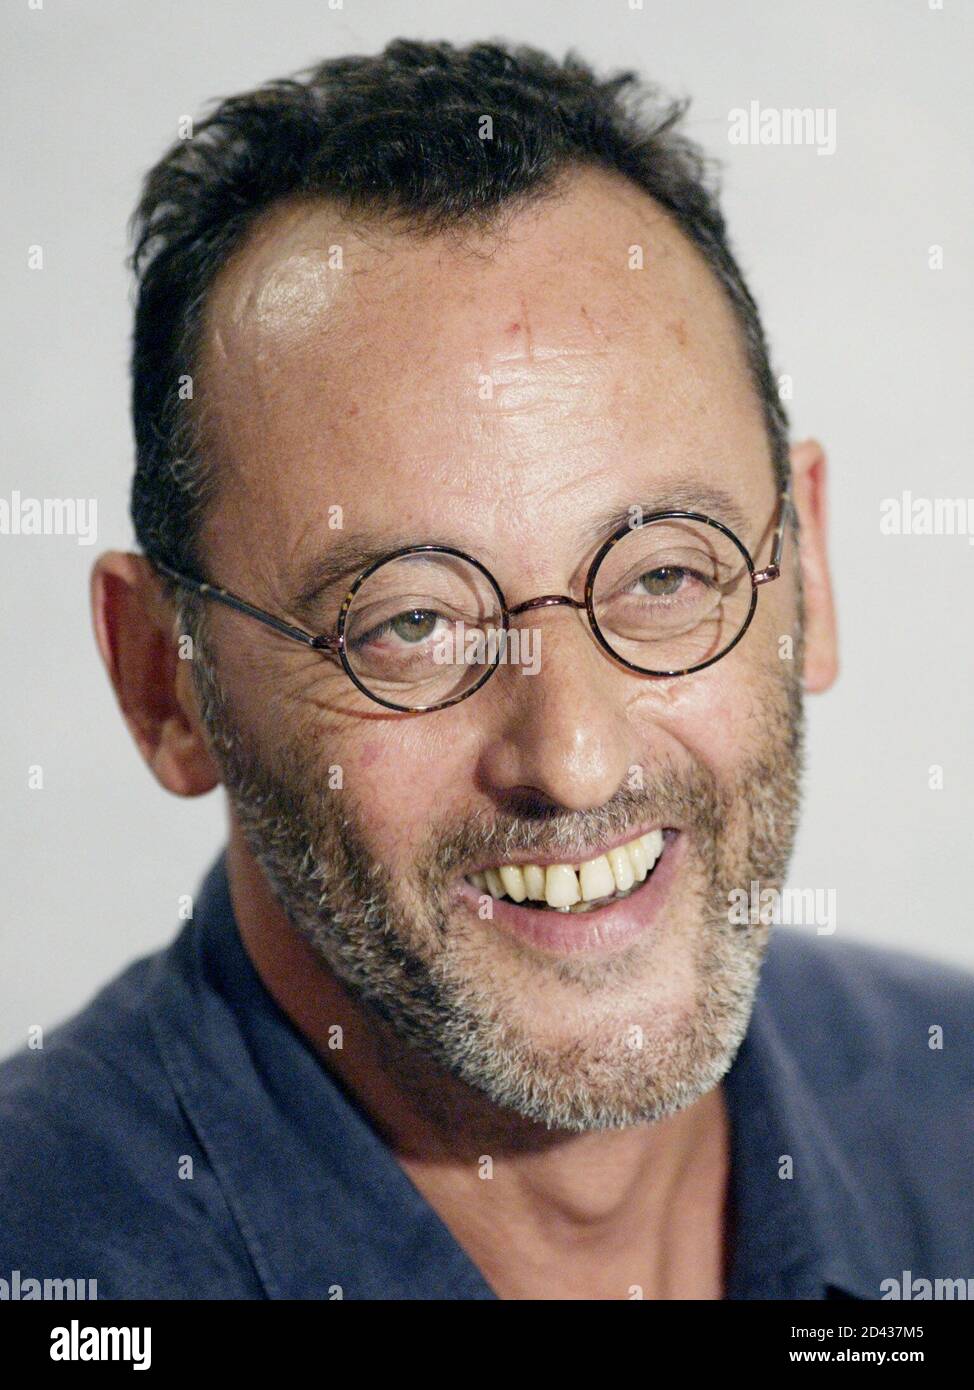 French actor Jean Reno smiles during a press conference to promote his film  "Jet Lag" at the 27th Toronto International Film Festival in Toronto,  September 9, 2002. [The film is a high-flying